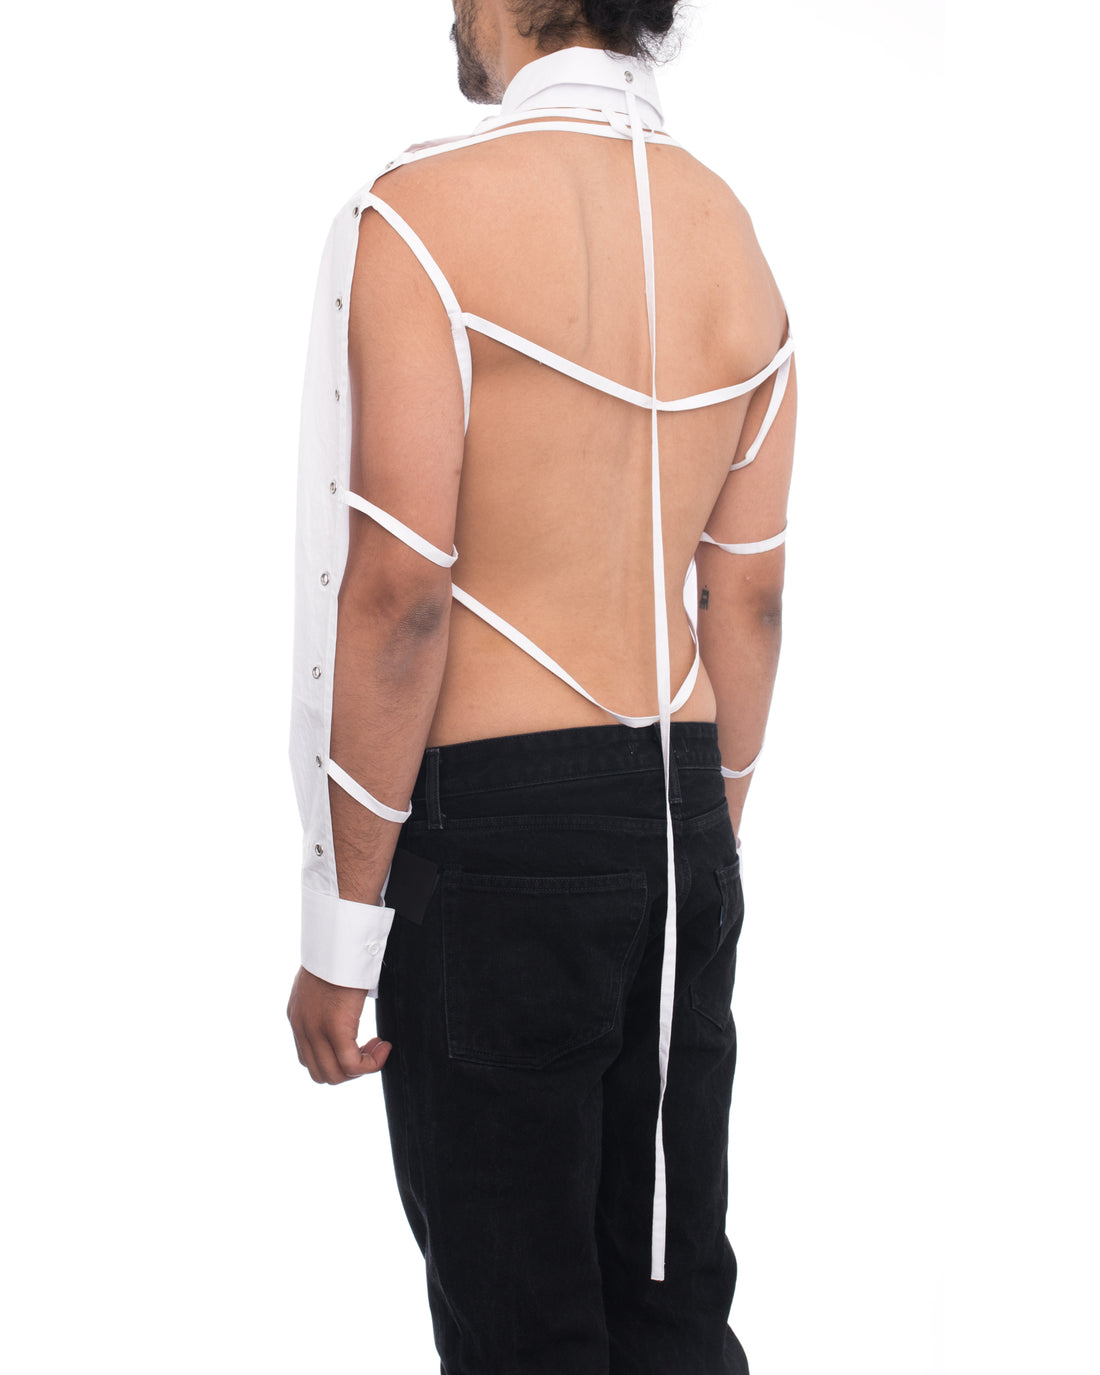 Craig Green Spring 2017 Backless White Dress Shirt with Laces - M